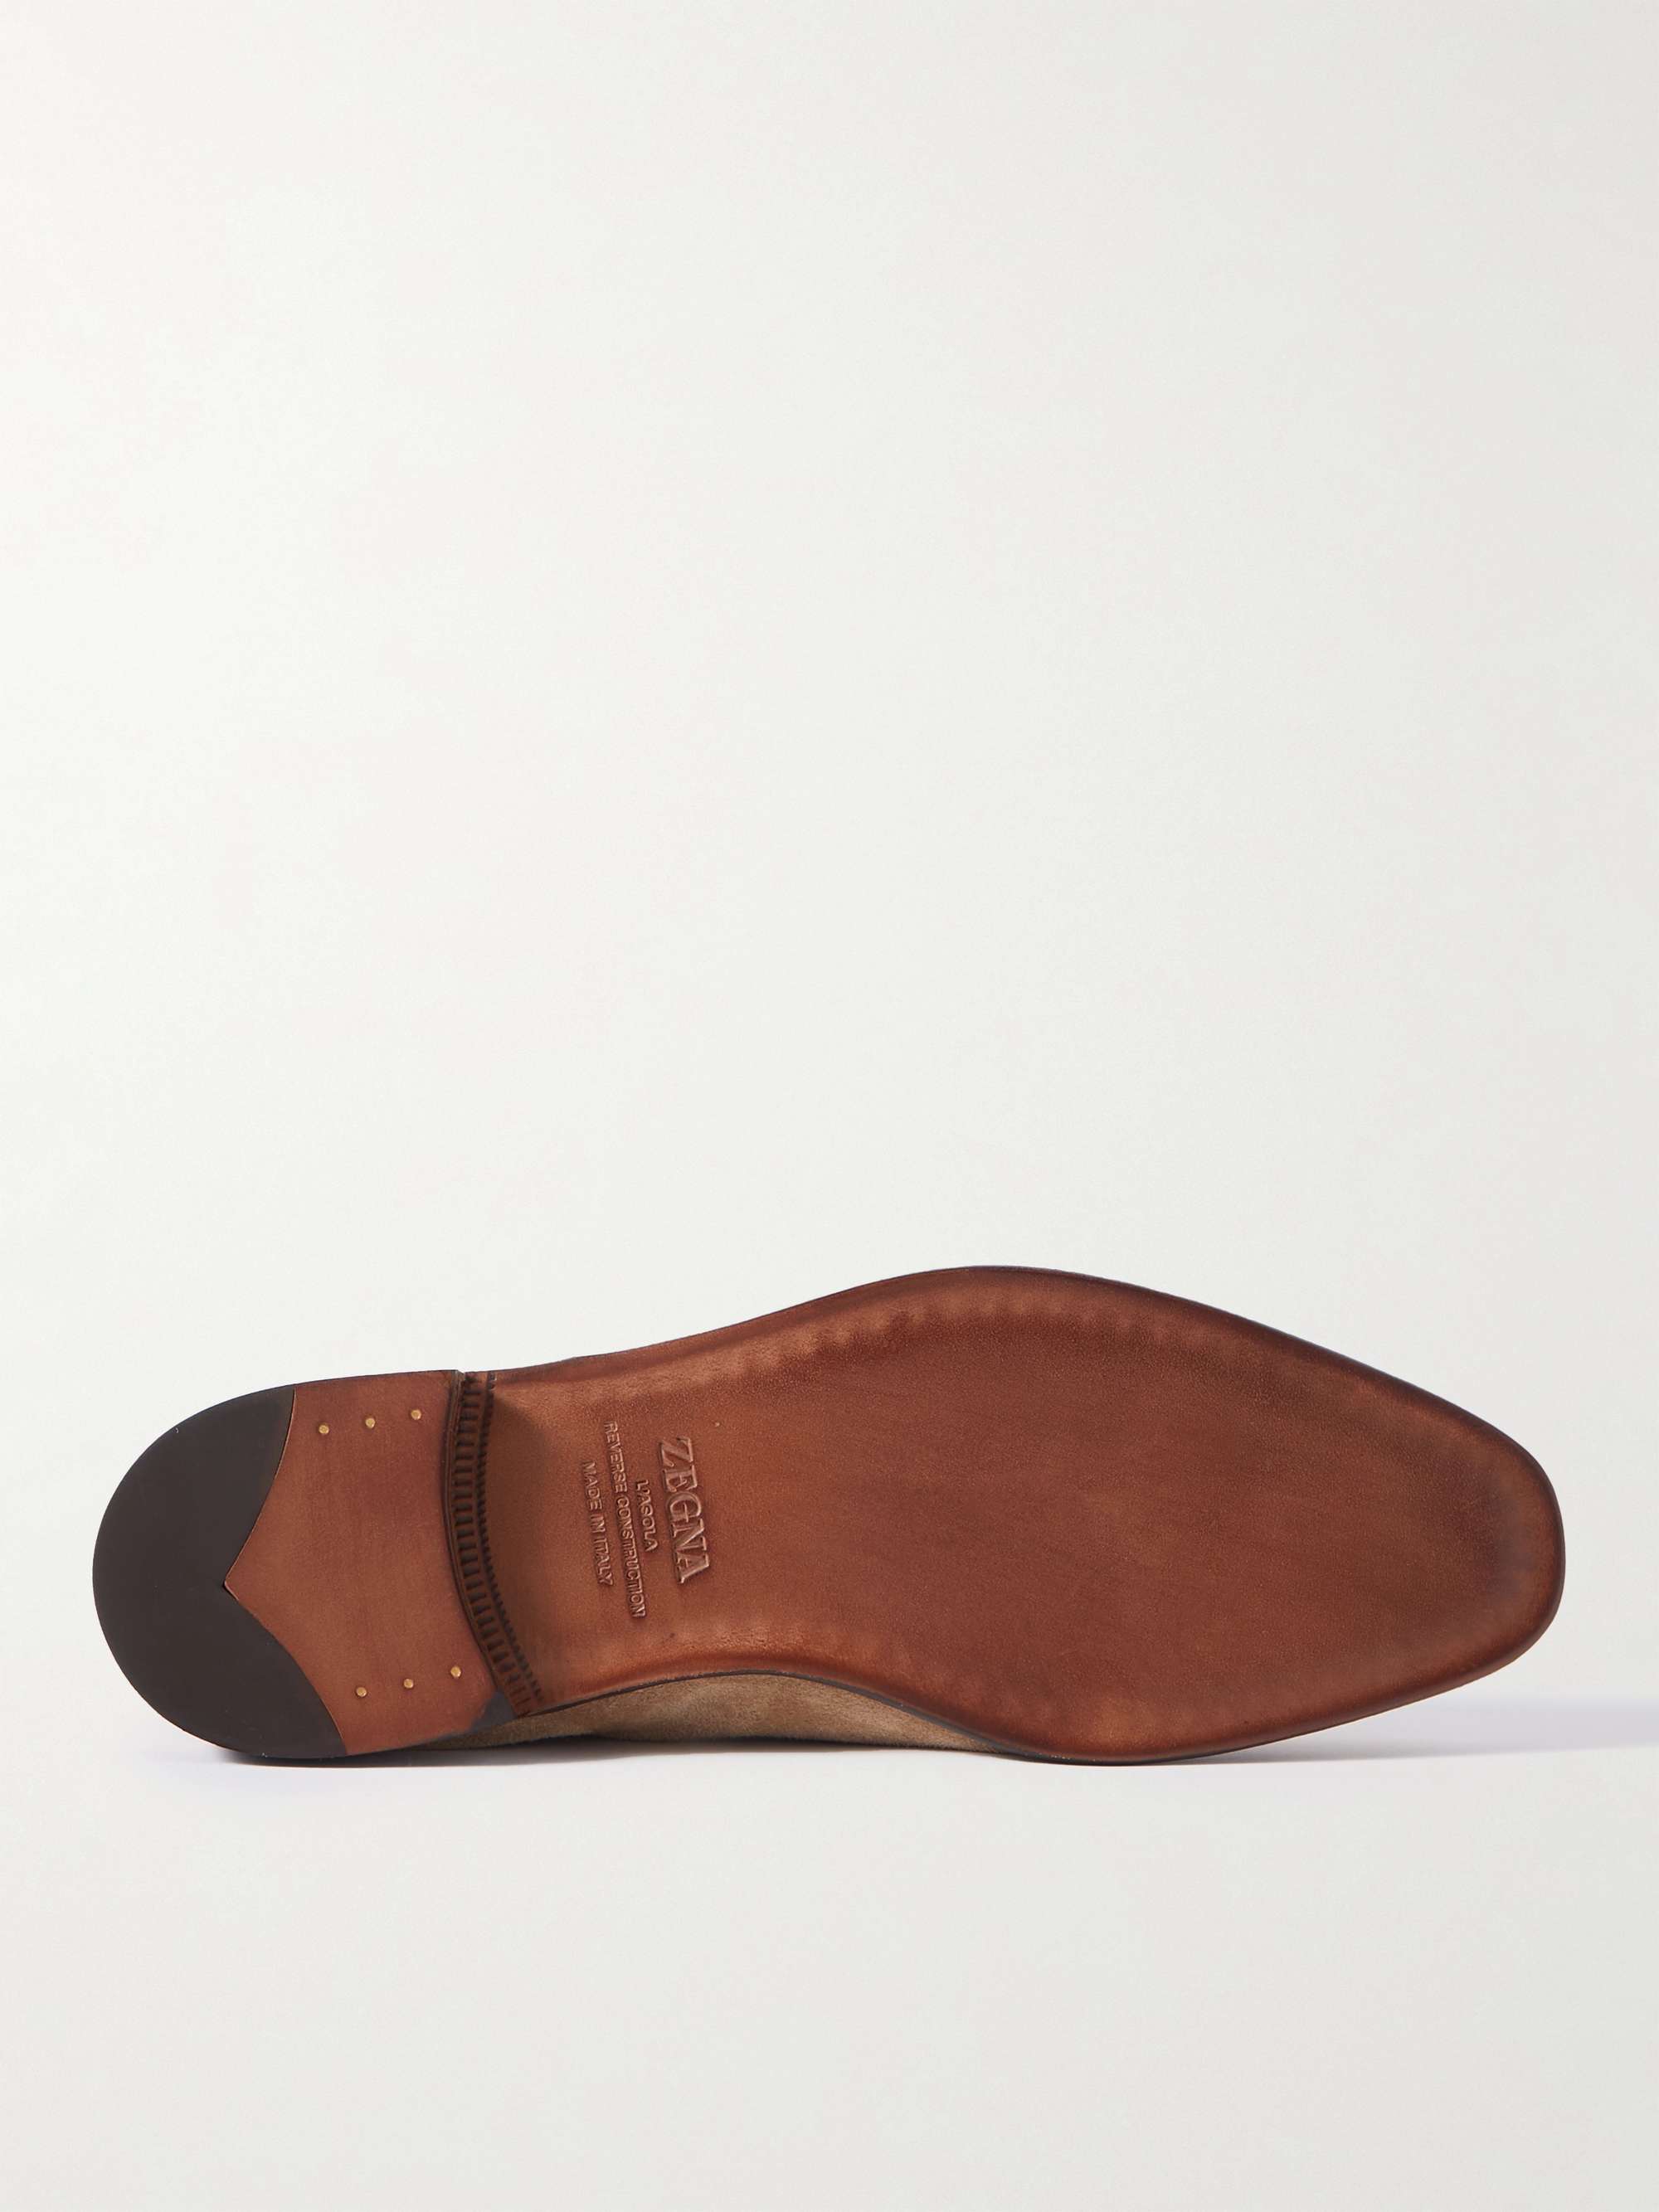 ZEGNA L'asola Suede Loafers